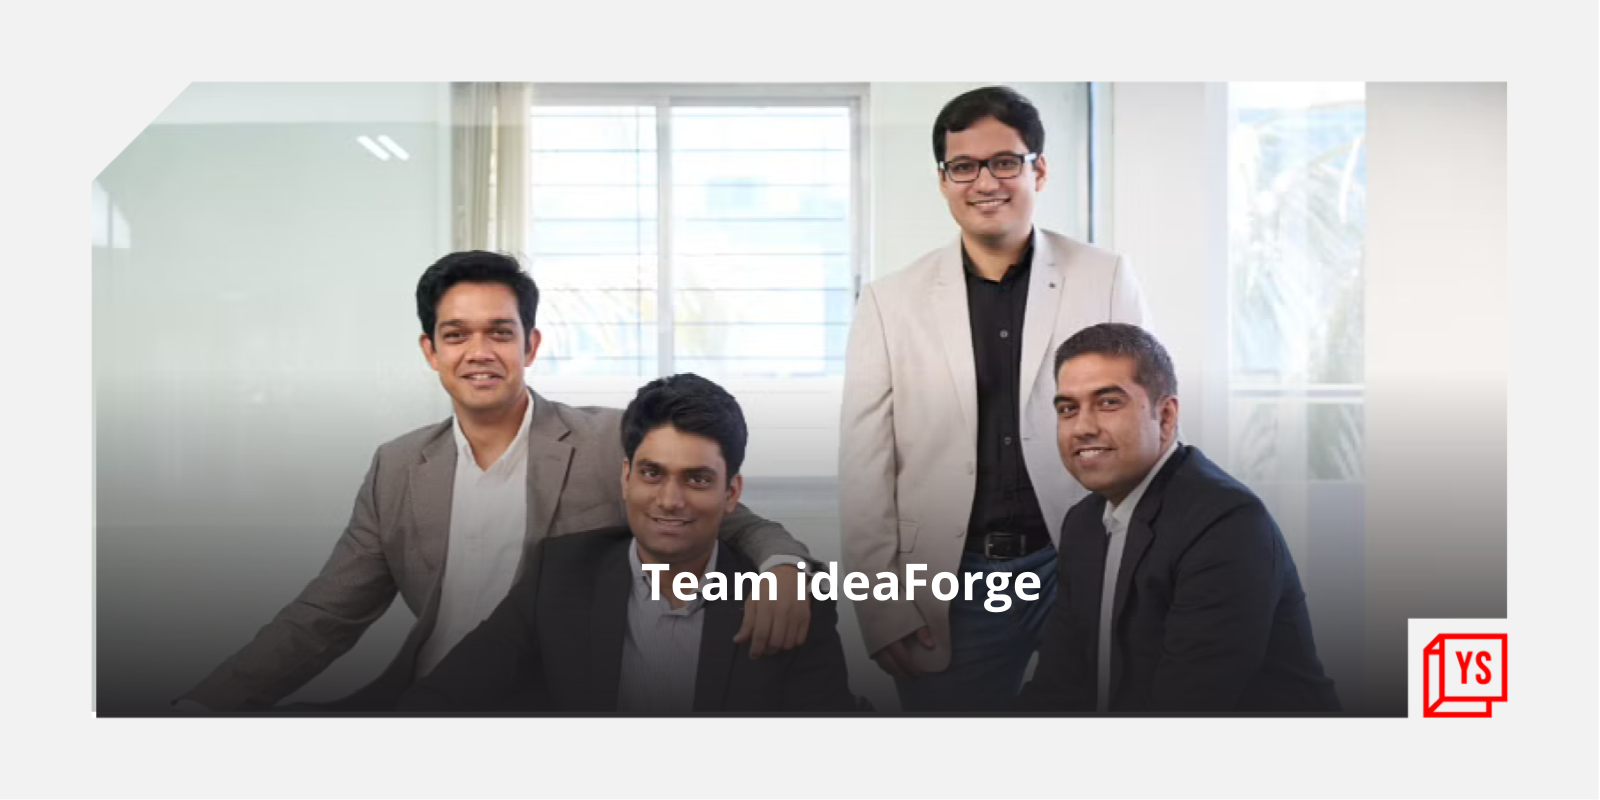 [Funding alert] Drone manufacturer ideaForge raises $20M led by Florintree